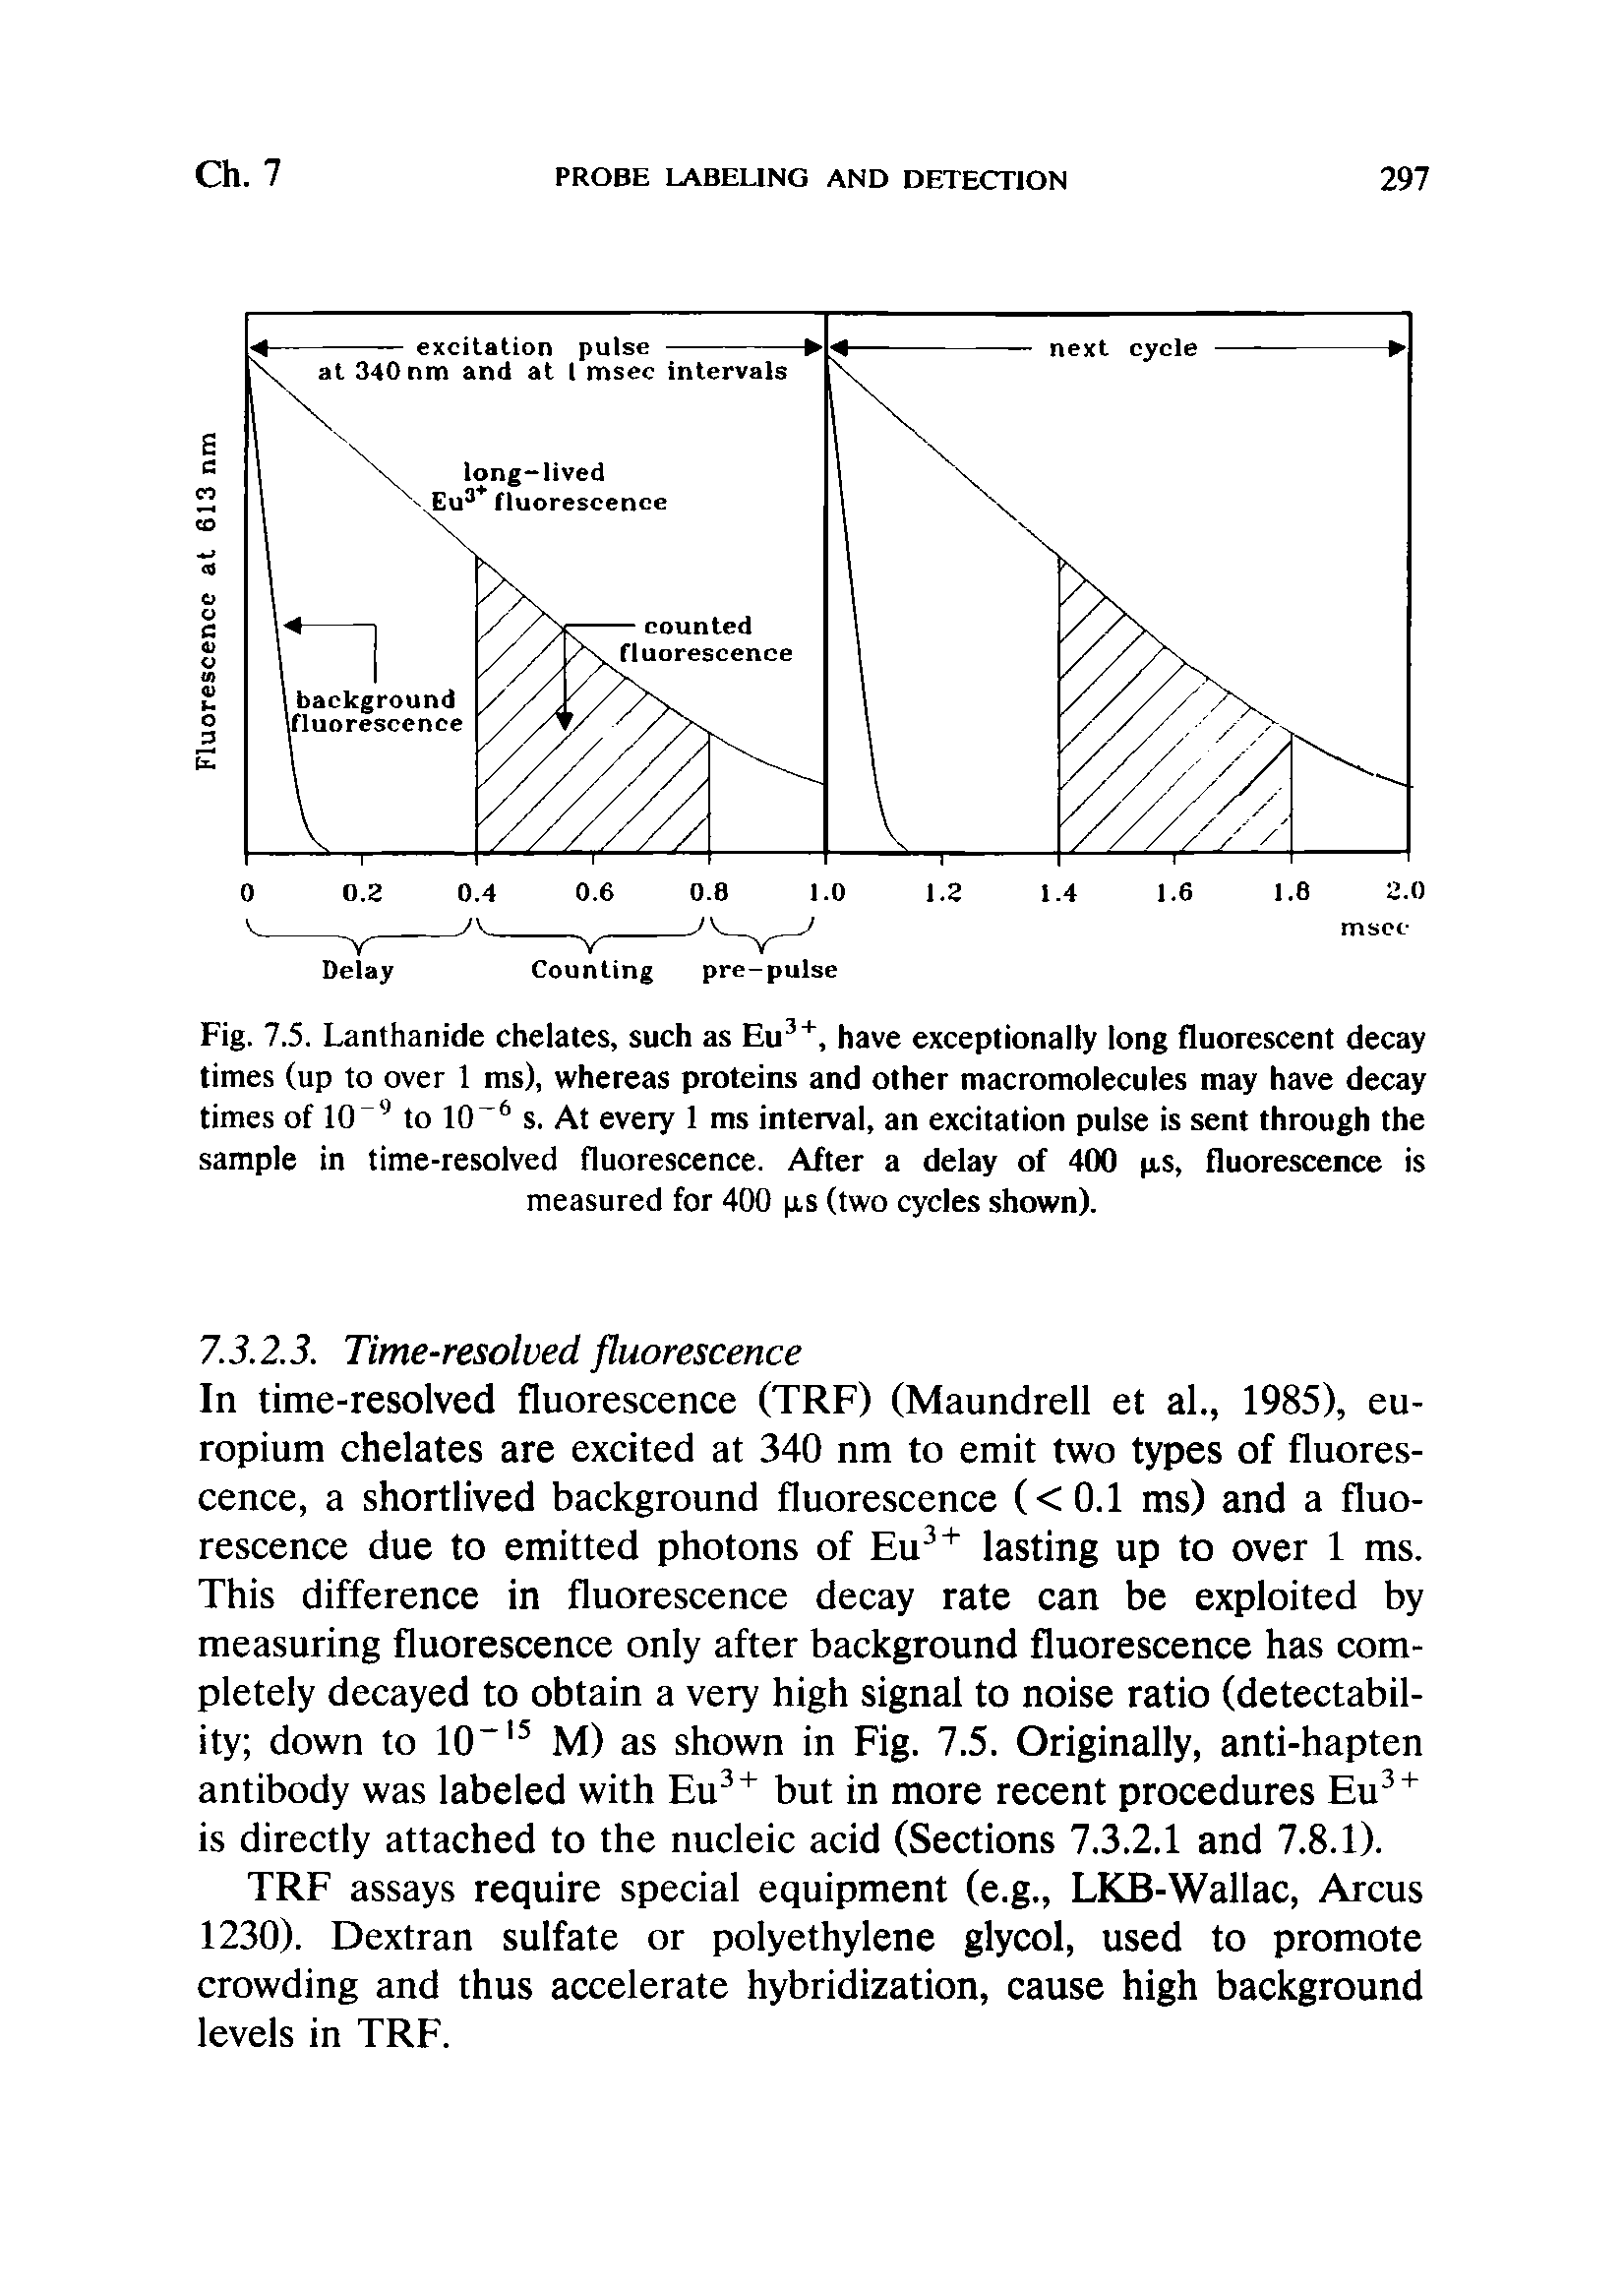 Fig. 7.5. Lanthanide chelates, such as Eu, have exceptionally long fluorescent decay times (up to over 1 ms), whereas proteins and other macromolecules may have decay times of 10 to 10 s. At every 1 ms interval, an excitation pulse is sent through the sample in time-resolved fluorescence. After a delay of 400 p,s, fluorescence is measured for 400 (xs (two cycles shown).